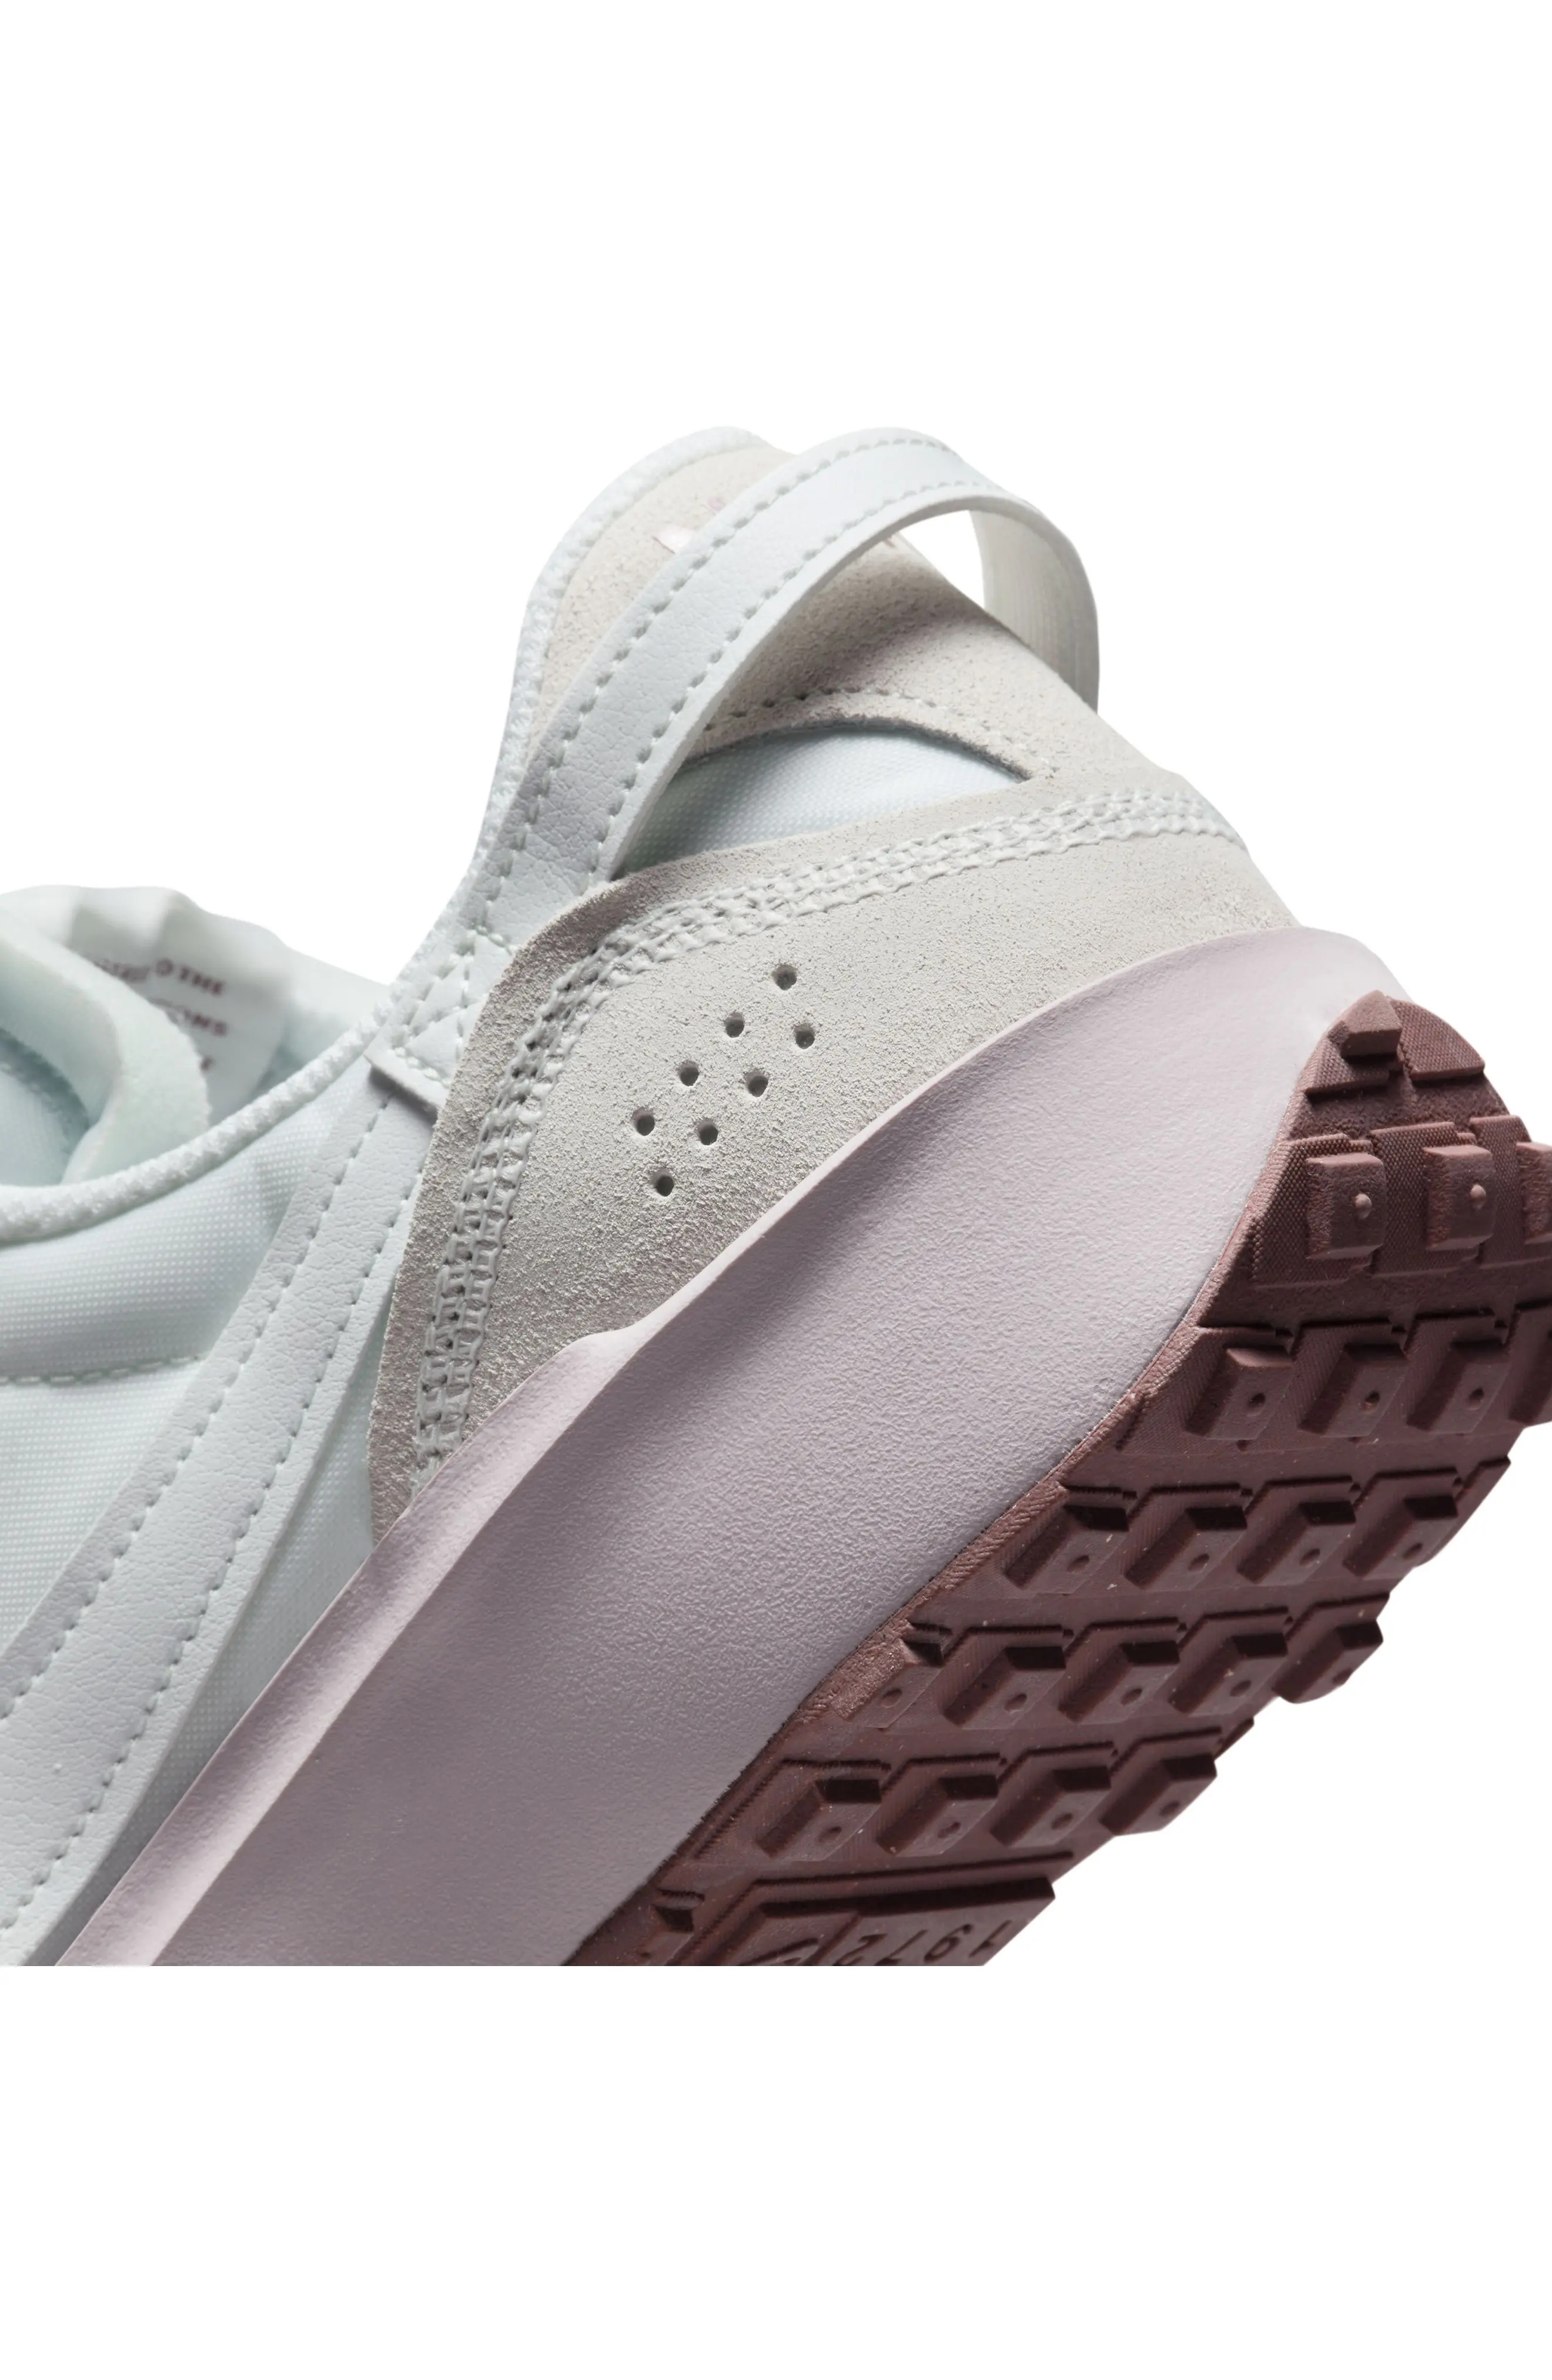 Waffle Debut Sneaker in White/Platinum/Mauve - 9